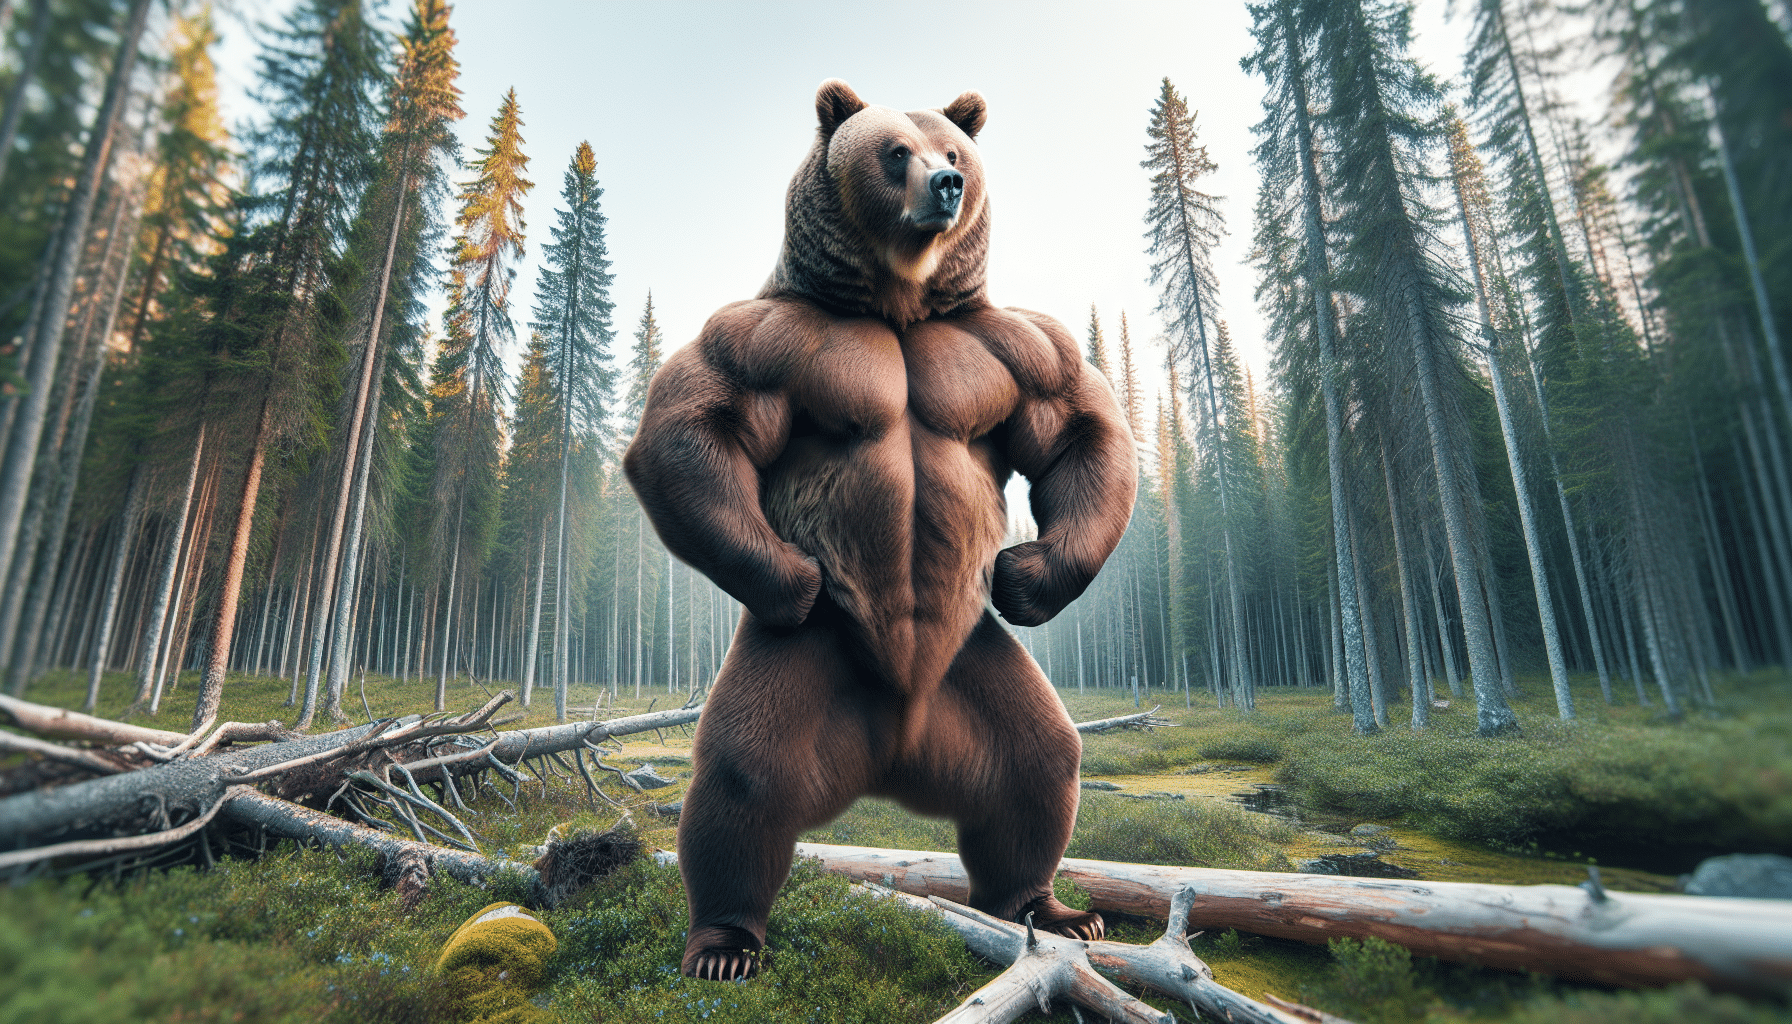 Visualize a powerful brown bear in the wilderness, demonstrating its strength through physical attributes. Against the backdrop of a dense forest, the bear is up on its hind legs, showcasing its formidable size and muscular arms. There are no humans, text, or brand logos present in this naturalistic scene. Instead, focus on the strength and wild beauty of the bear, surrounded by untouched nature, embodying the essence of its power and resilience without the need for any text explanation.